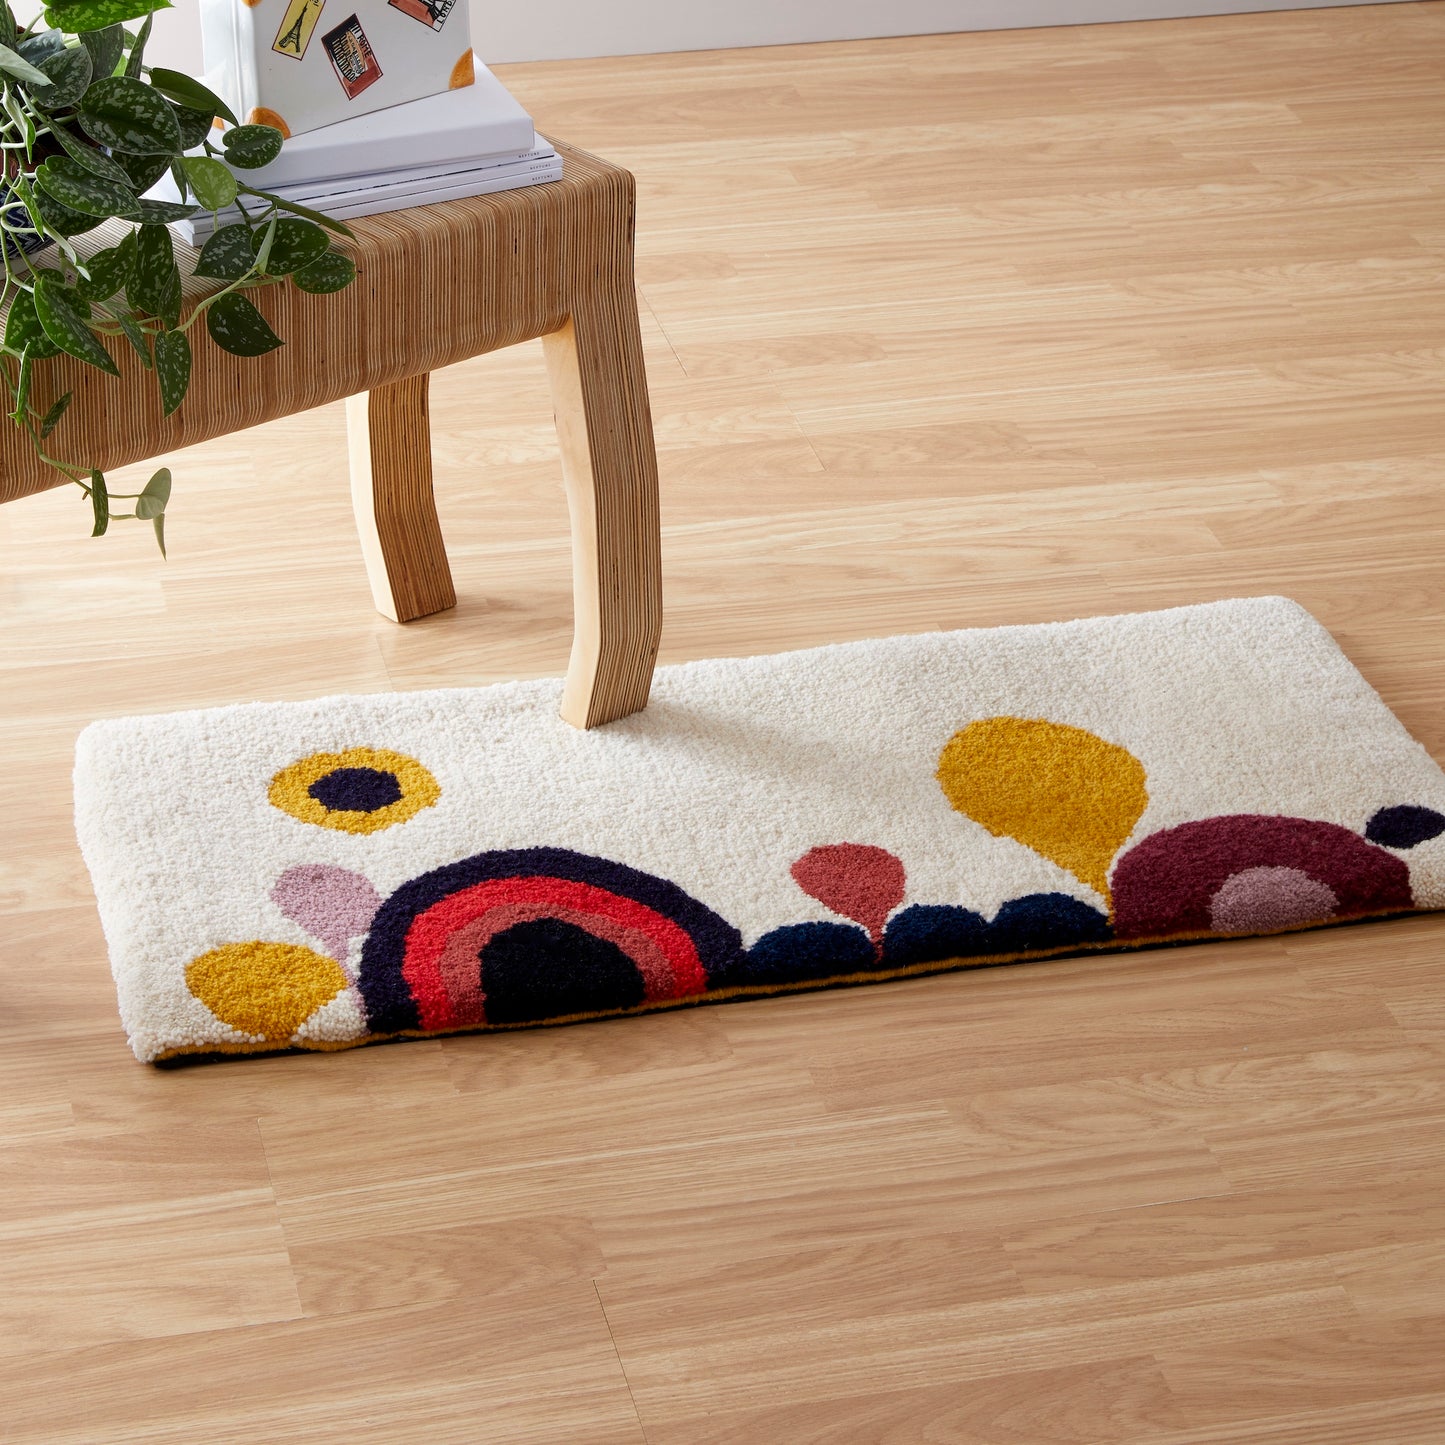 A cartoon-esque Candy Landscape rug runner with rainbows, hills and trees, hand tufted in a mixture of mustard, lilac, cream, red, coral, black, navy and maroon reclaimed yarns. A cut pile finish with hand bound mustard edges.